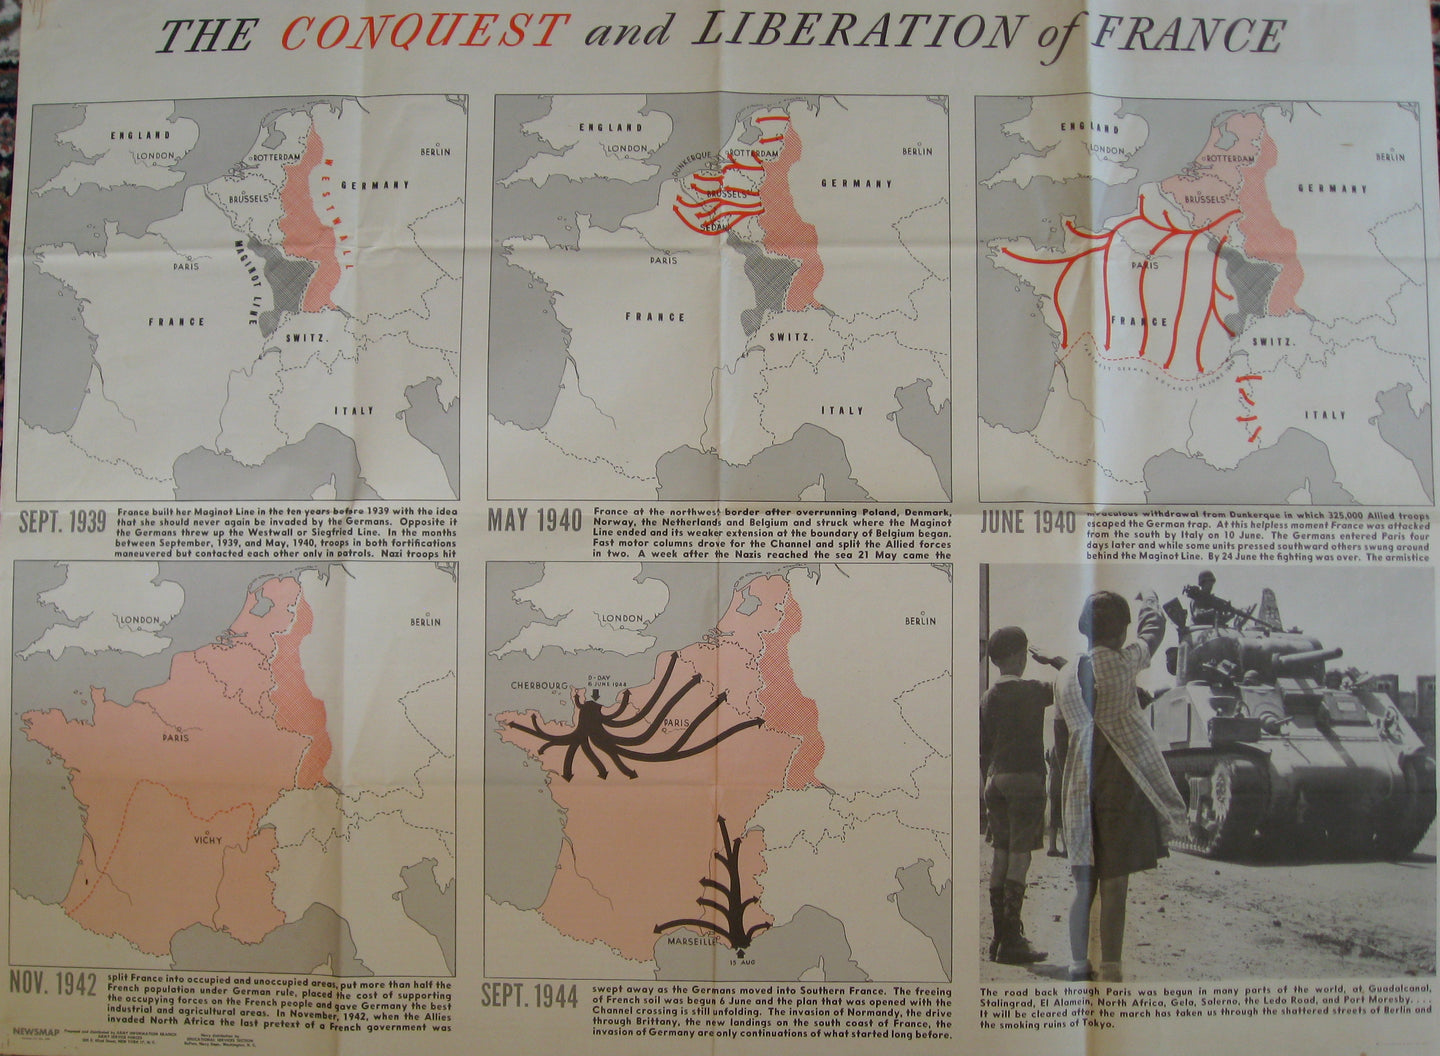 Antique-Military-Lithographed-Map-Conquest-and-Liberation-of-France/-WWII-Newsmap-****-Military-World-War-II-1944-U.S.-Government-Maps-Of-Antiquity